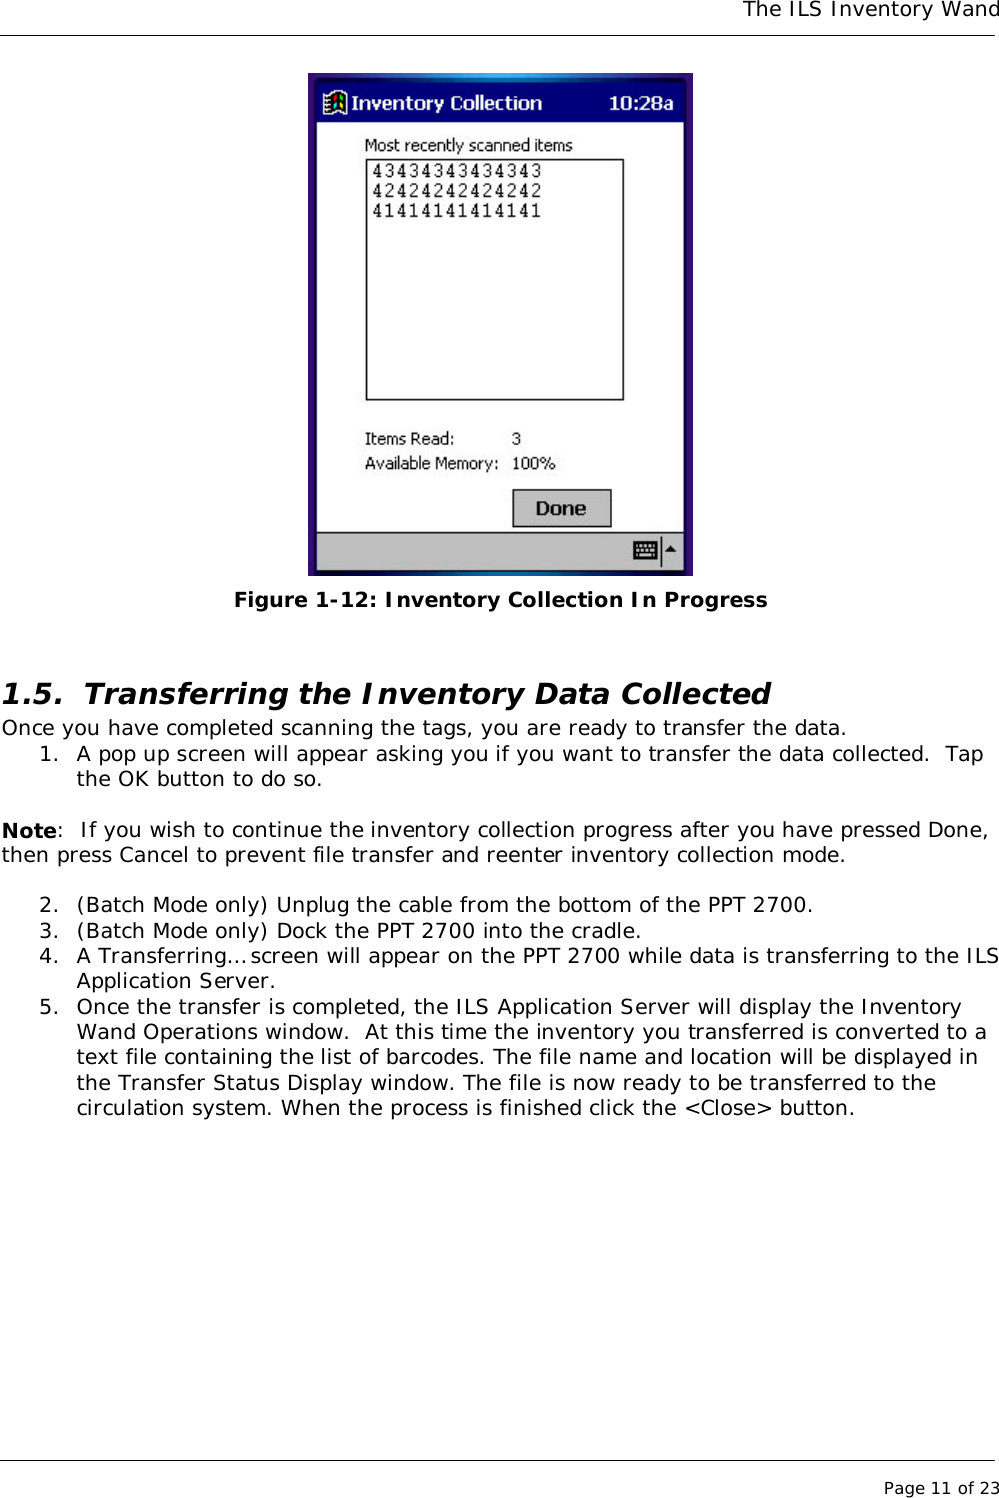 The ILS Inventory WandPage 11 of 23Figure 1-12: Inventory Collection In Progress1.5. Transferring the Inventory Data CollectedOnce you have completed scanning the tags, you are ready to transfer the data.1. A pop up screen will appear asking you if you want to transfer the data collected.  Tapthe OK button to do so.Note:  If you wish to continue the inventory collection progress after you have pressed Done,then press Cancel to prevent file transfer and reenter inventory collection mode.2. (Batch Mode only) Unplug the cable from the bottom of the PPT 2700.3. (Batch Mode only) Dock the PPT 2700 into the cradle.4. A Transferring… screen will appear on the PPT 2700 while data is transferring to the ILSApplication Server.5. Once the transfer is completed, the ILS Application Server will display the InventoryWand Operations window.  At this time the inventory you transferred is converted to atext file containing the list of barcodes. The file name and location will be displayed inthe Transfer Status Display window. The file is now ready to be transferred to thecirculation system. When the process is finished click the &lt;Close&gt; button.